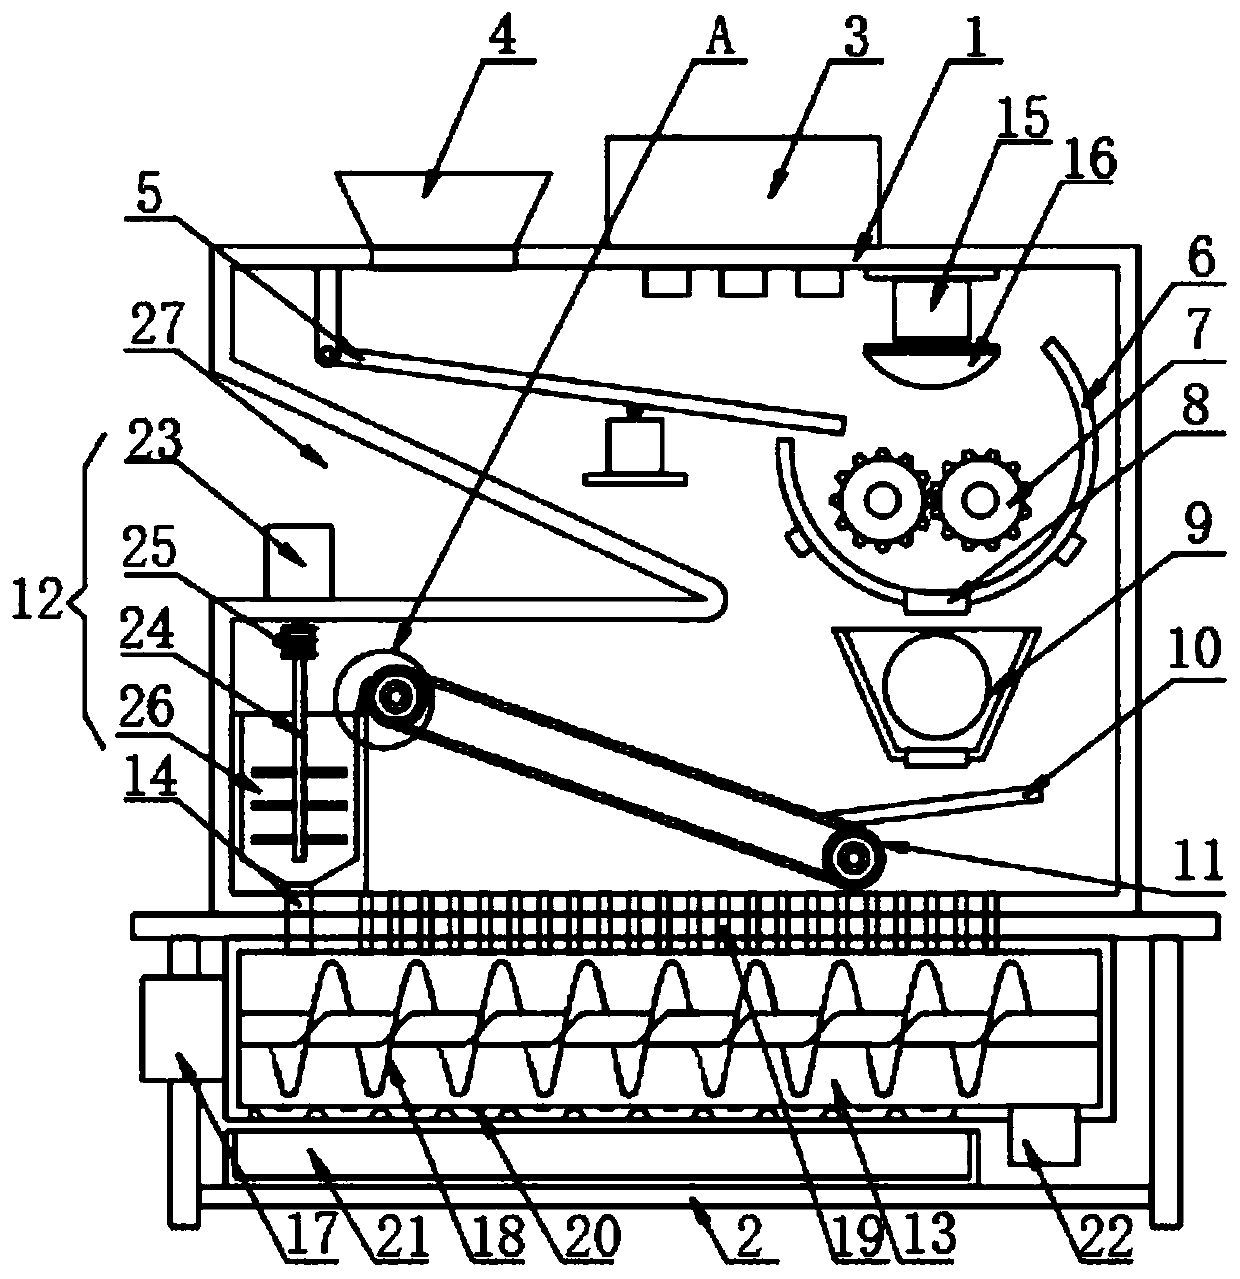 Gravel crushing device for architectural engineering